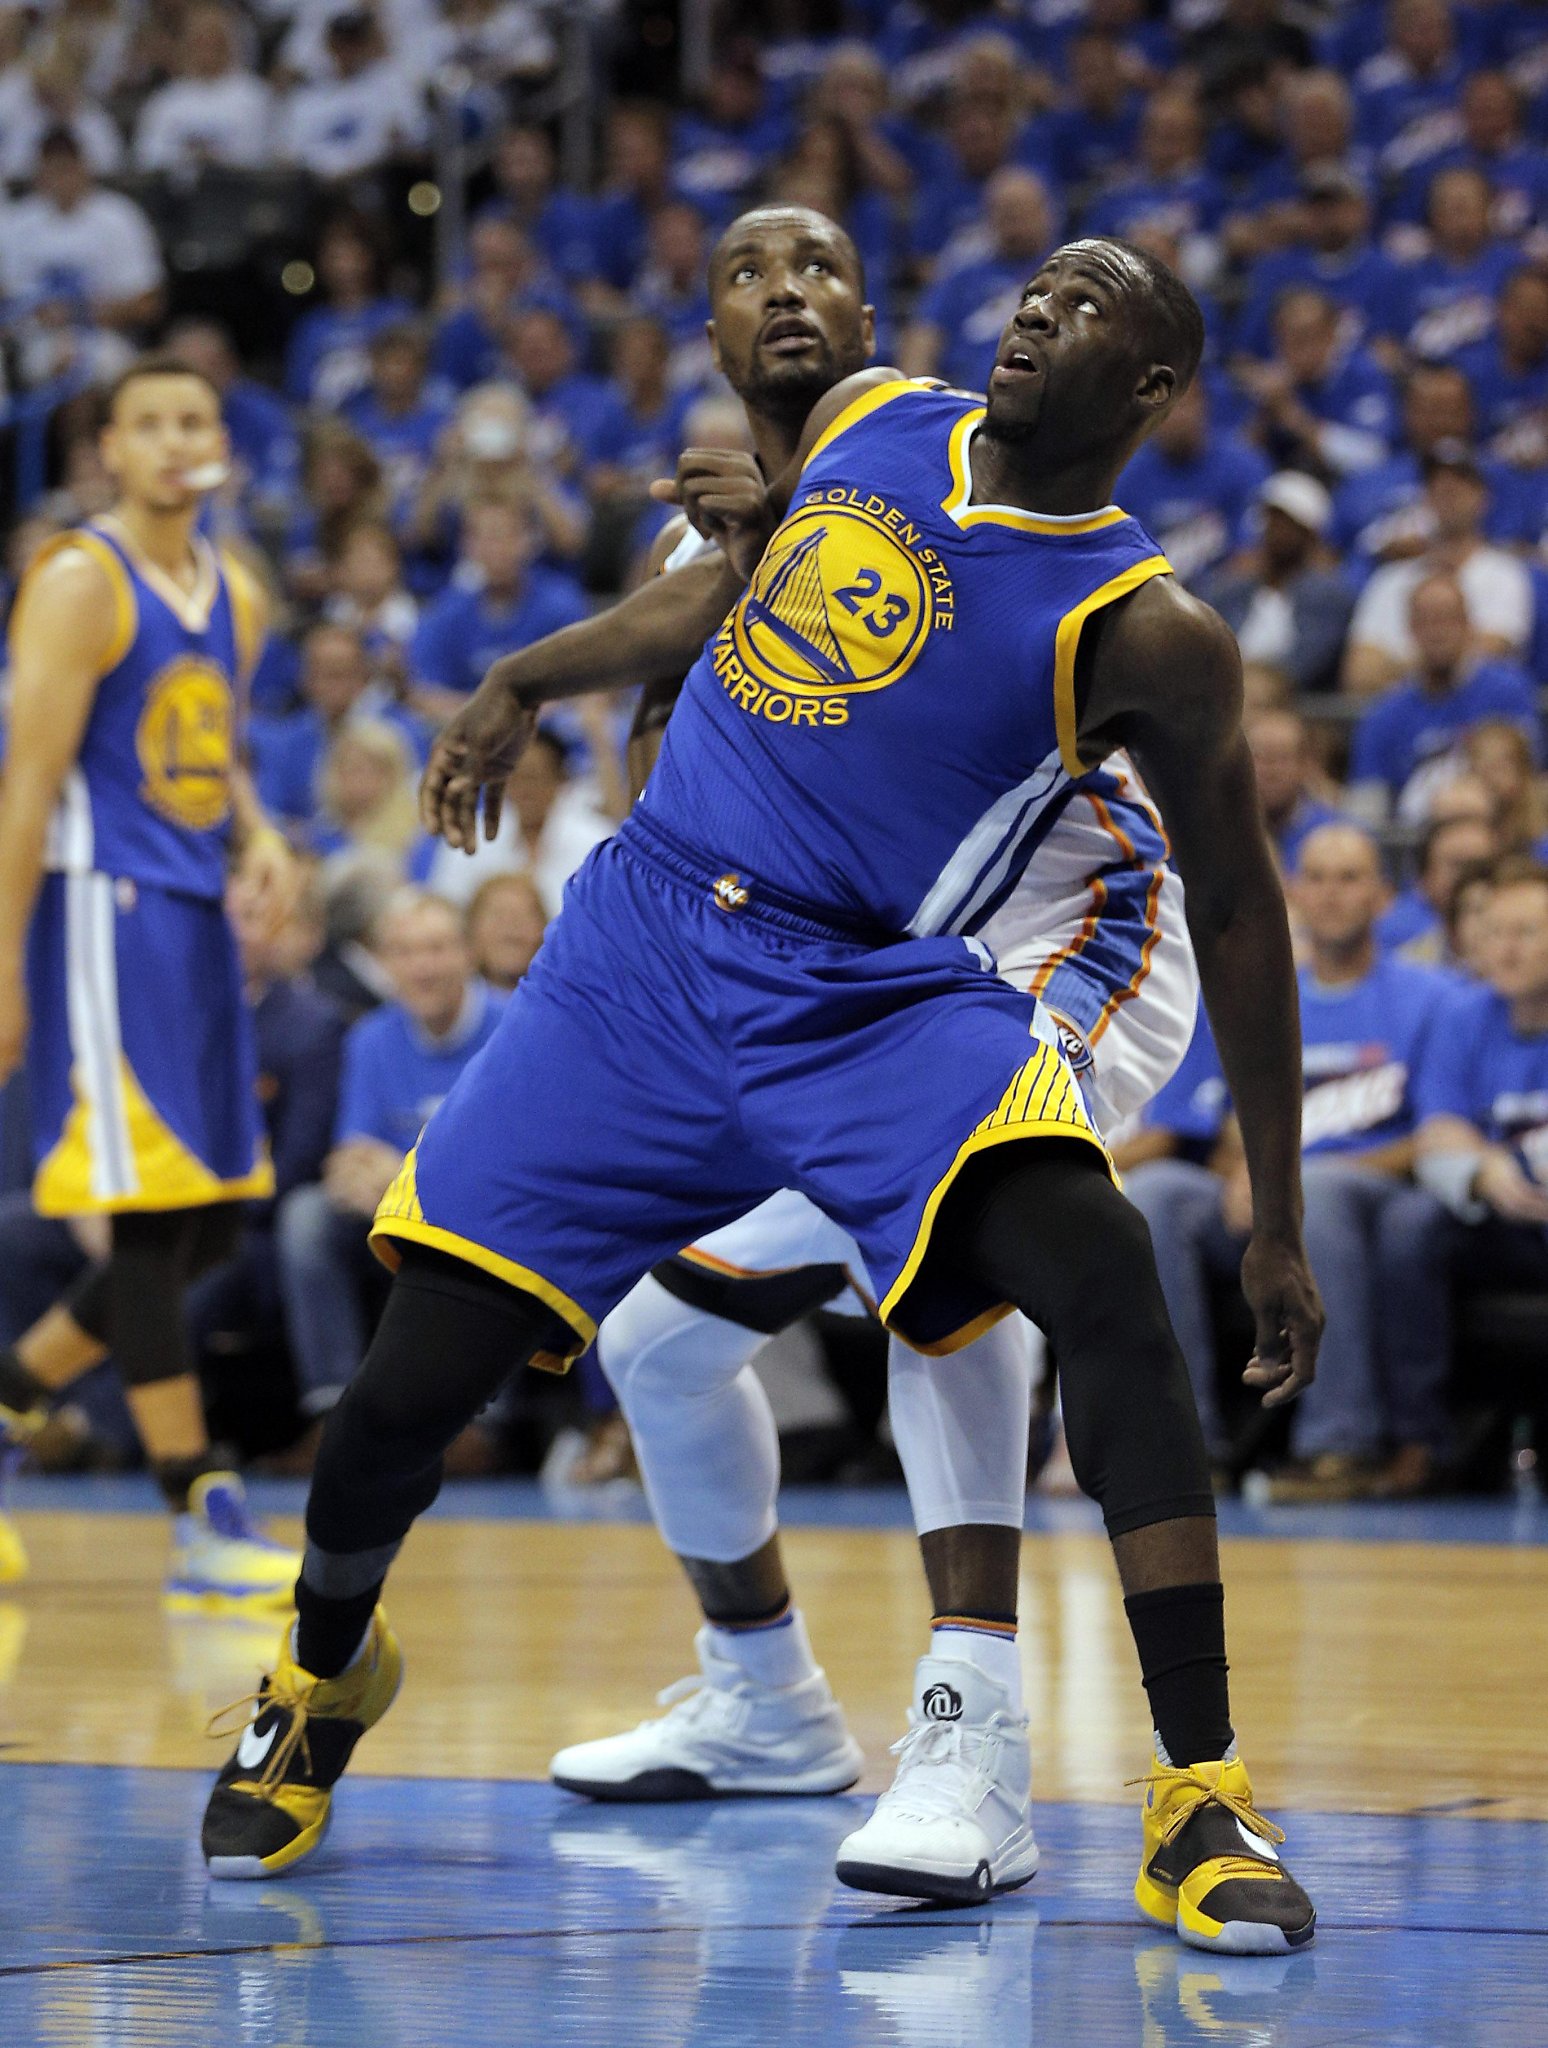 After rough patch, Warriors' Green ready for NBA Finals